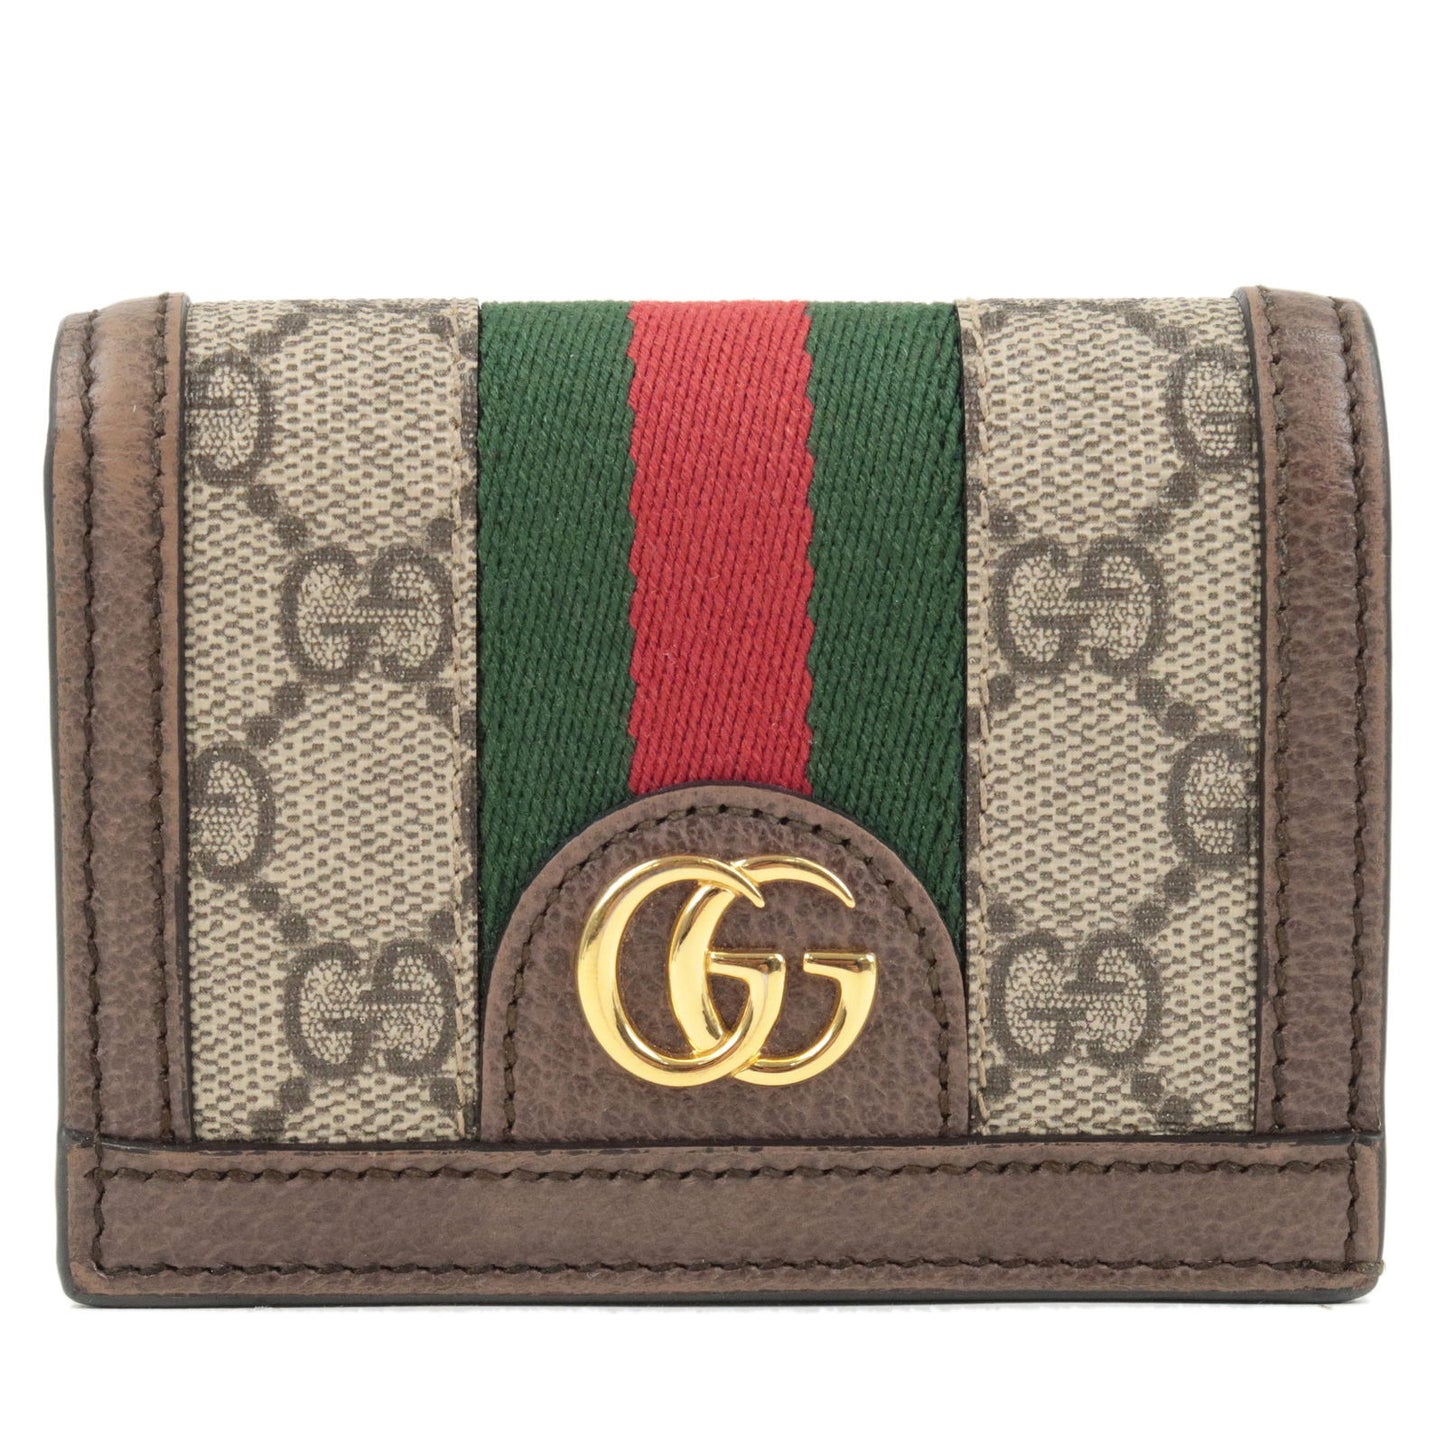 GUCCI-Sherry-Ophidia-GG-Supreme-Leather-Folded-Wallet-523155